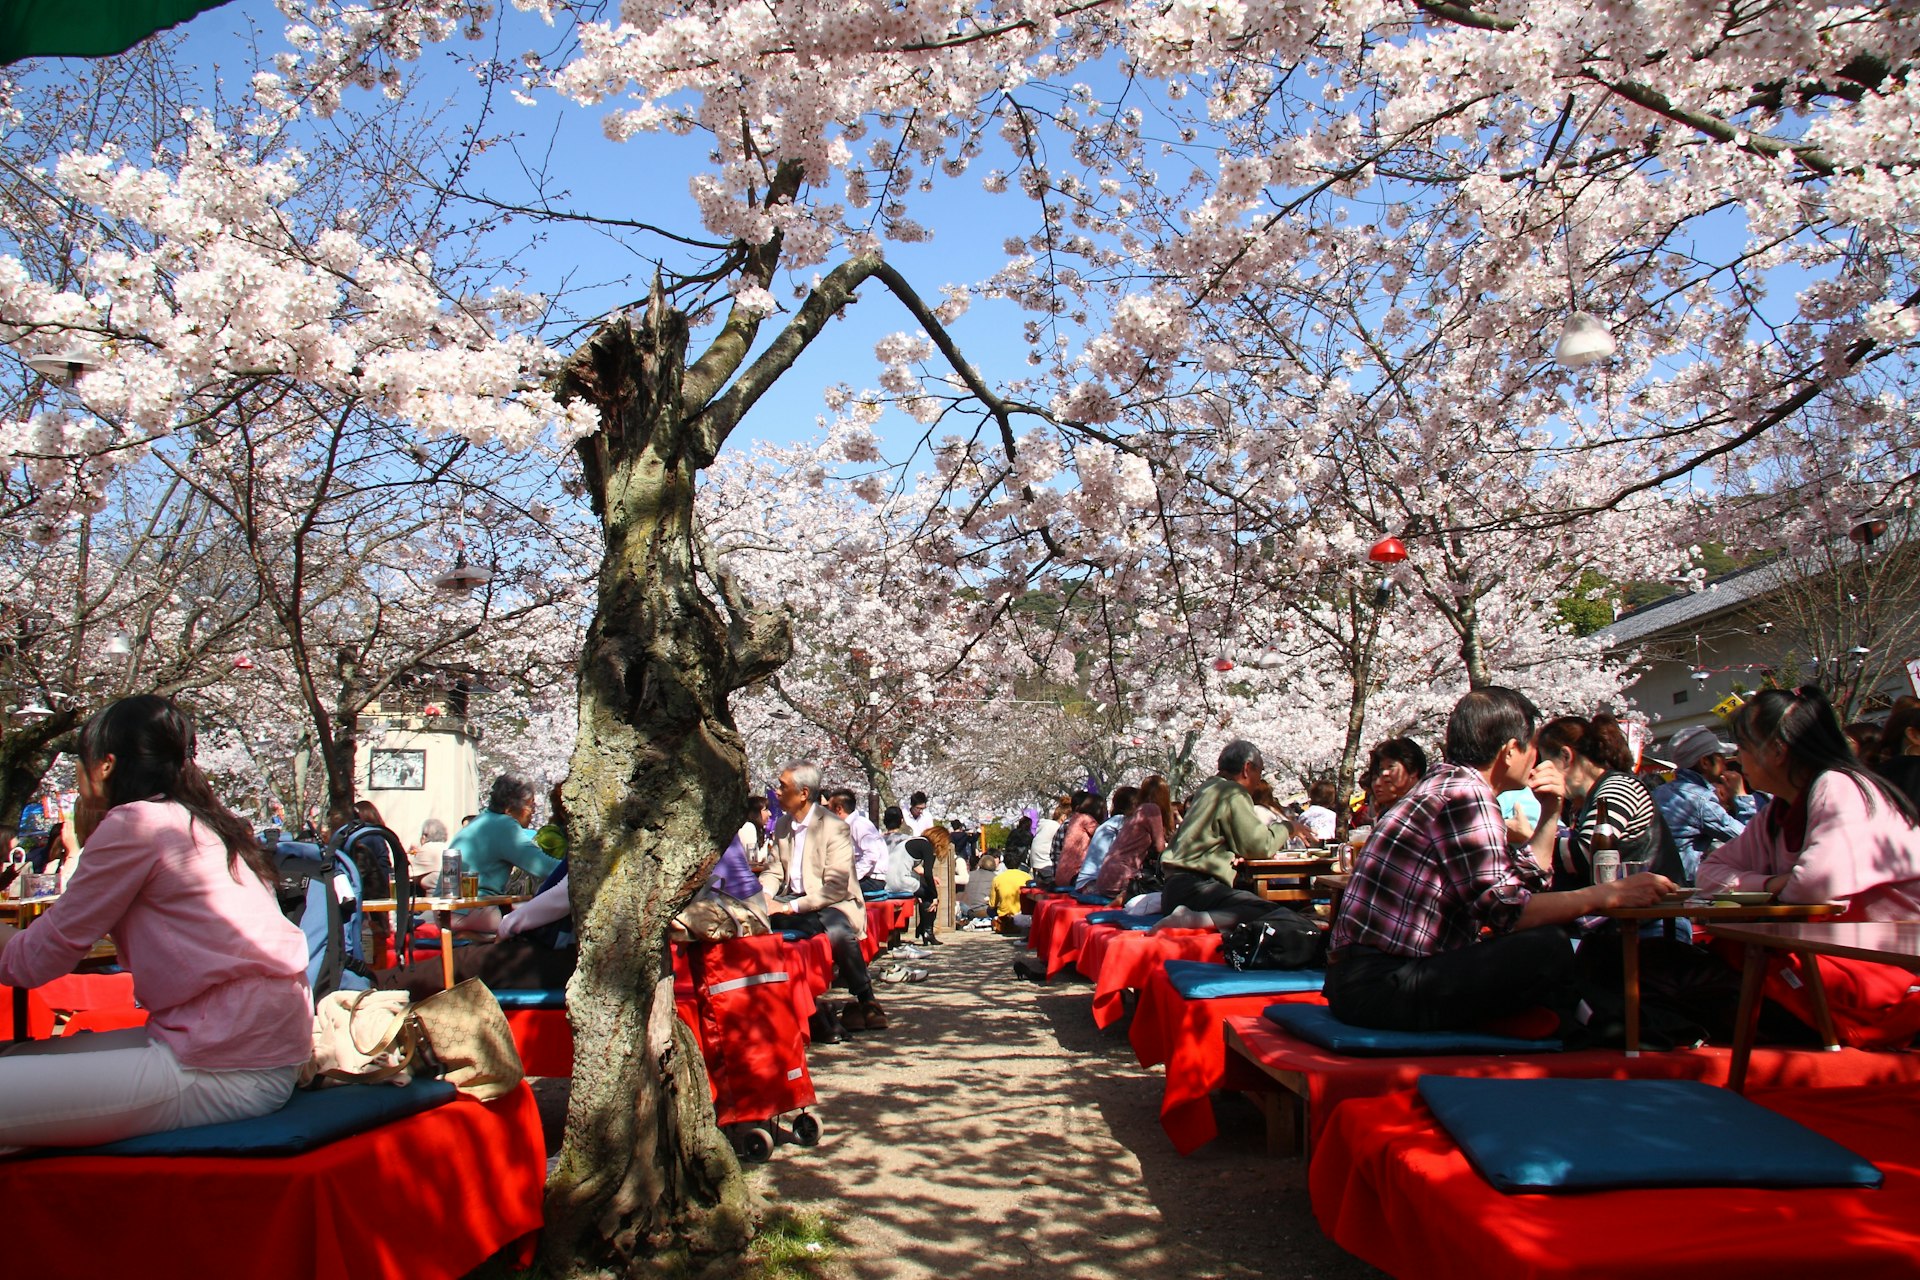 Japanese people gathering  in Maruyama Park under cherry blossom trees for hanami